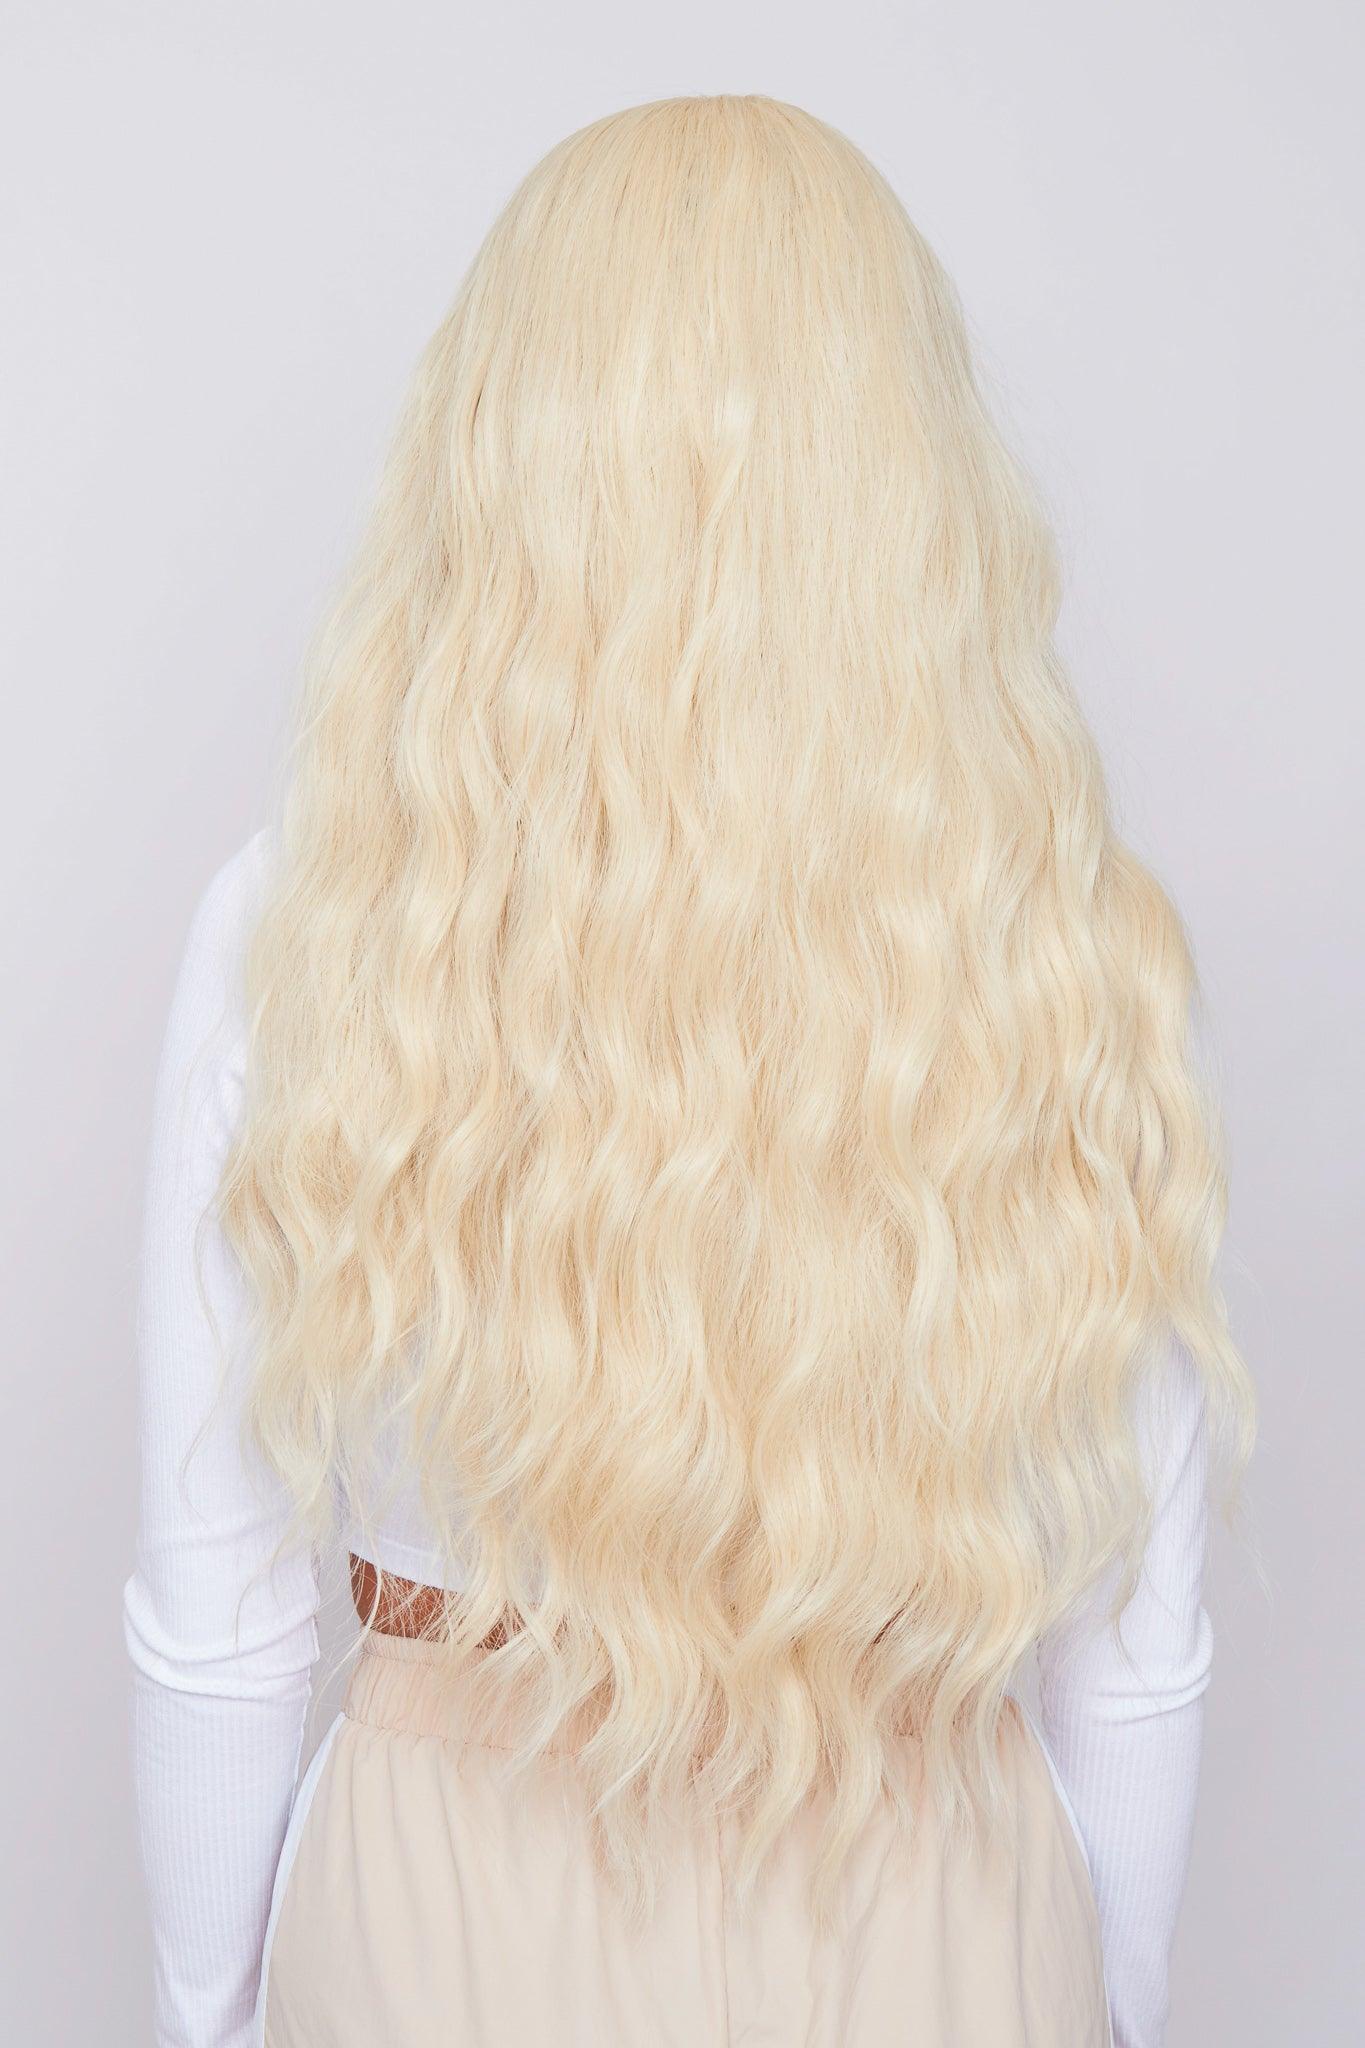 bleach blonde wig long and wavy being worn by girl form hair company pbeauty hair